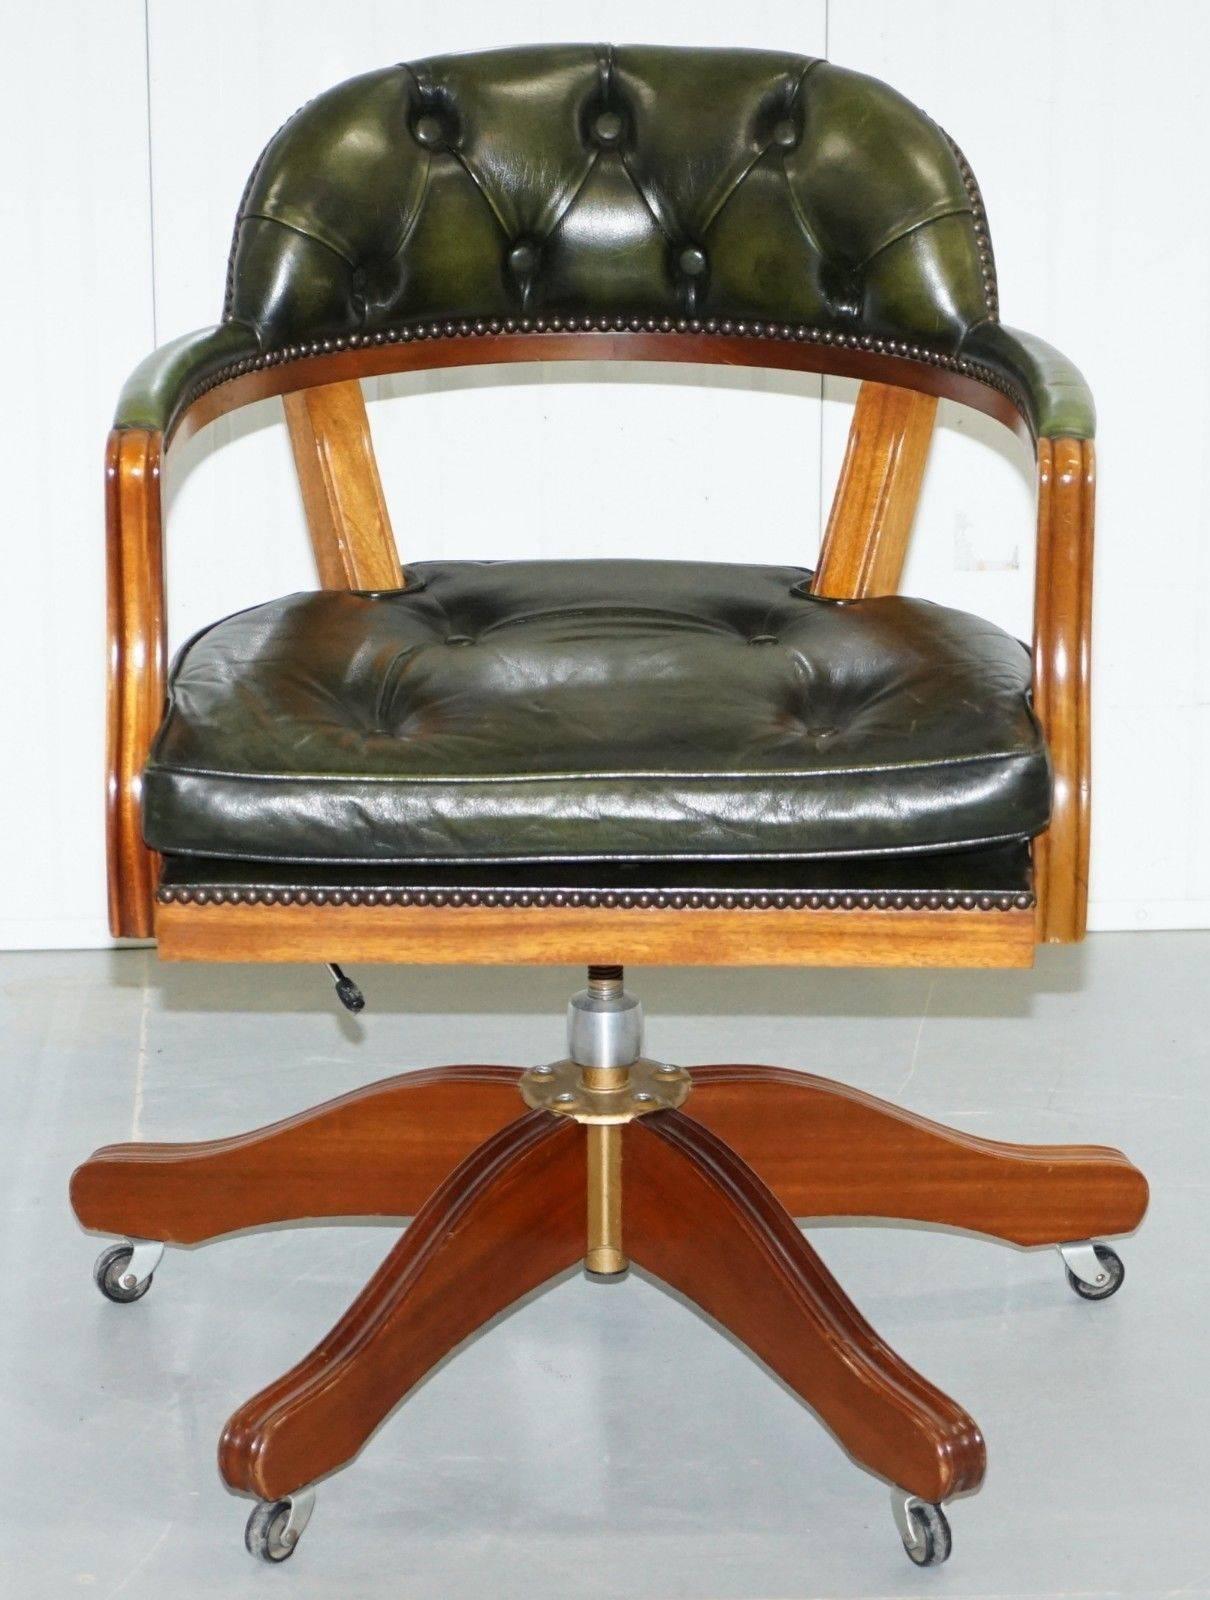 We are delighted to offer for sale this lovely aged green leather Chesterfield Admirals court captain’s chair.

These chairs are called court chairs because they little the British court system during the 1960s-1980s.

This chair is in lightly